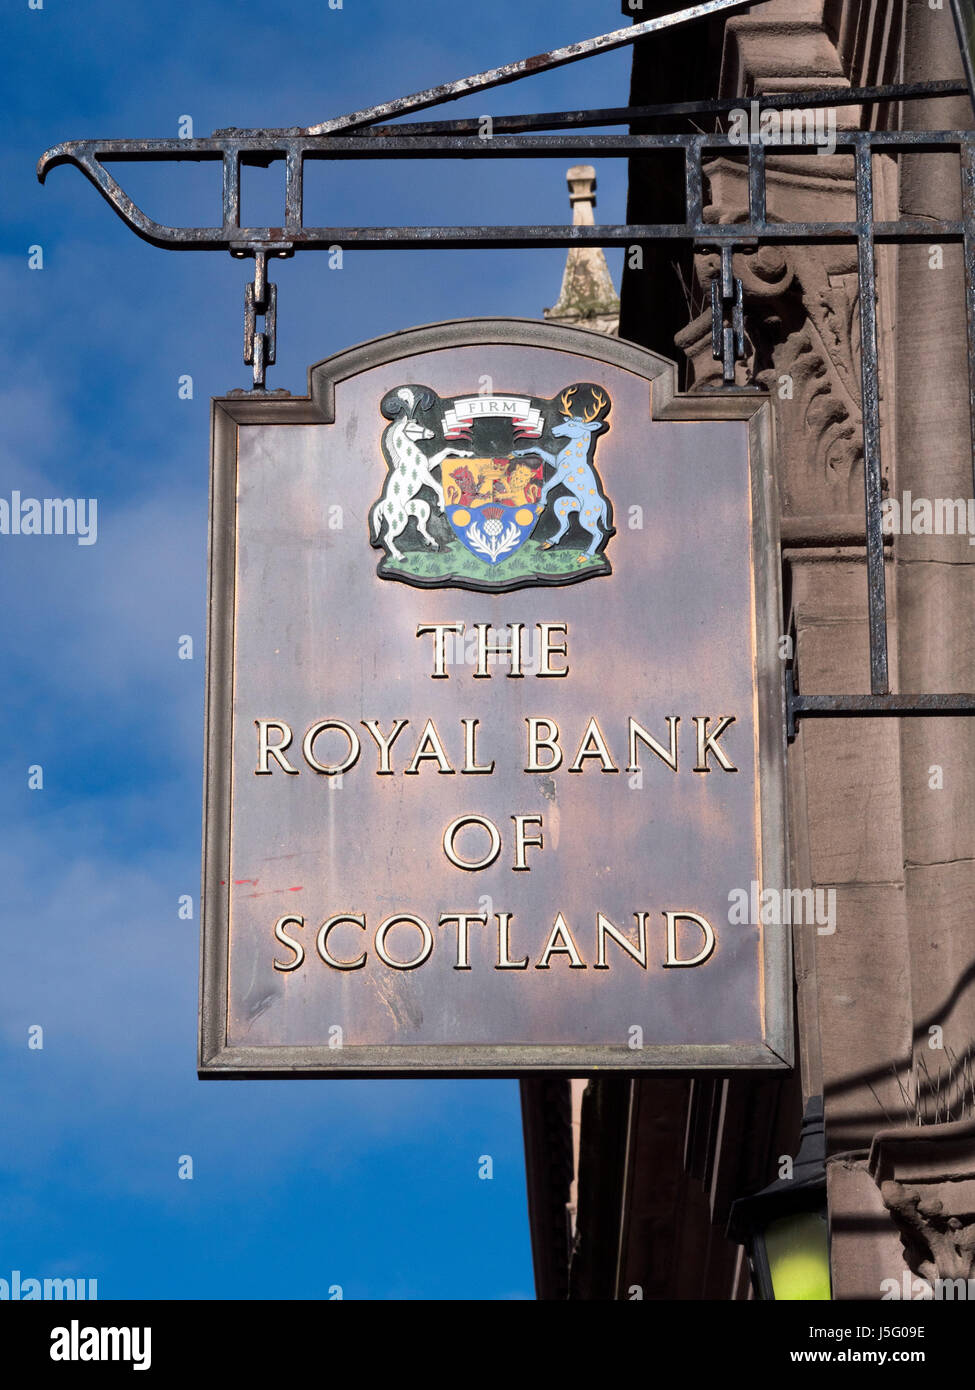 Hanging sign for The Royal Bank of Scotland, Dundee, Scotland, UK Stock Photo